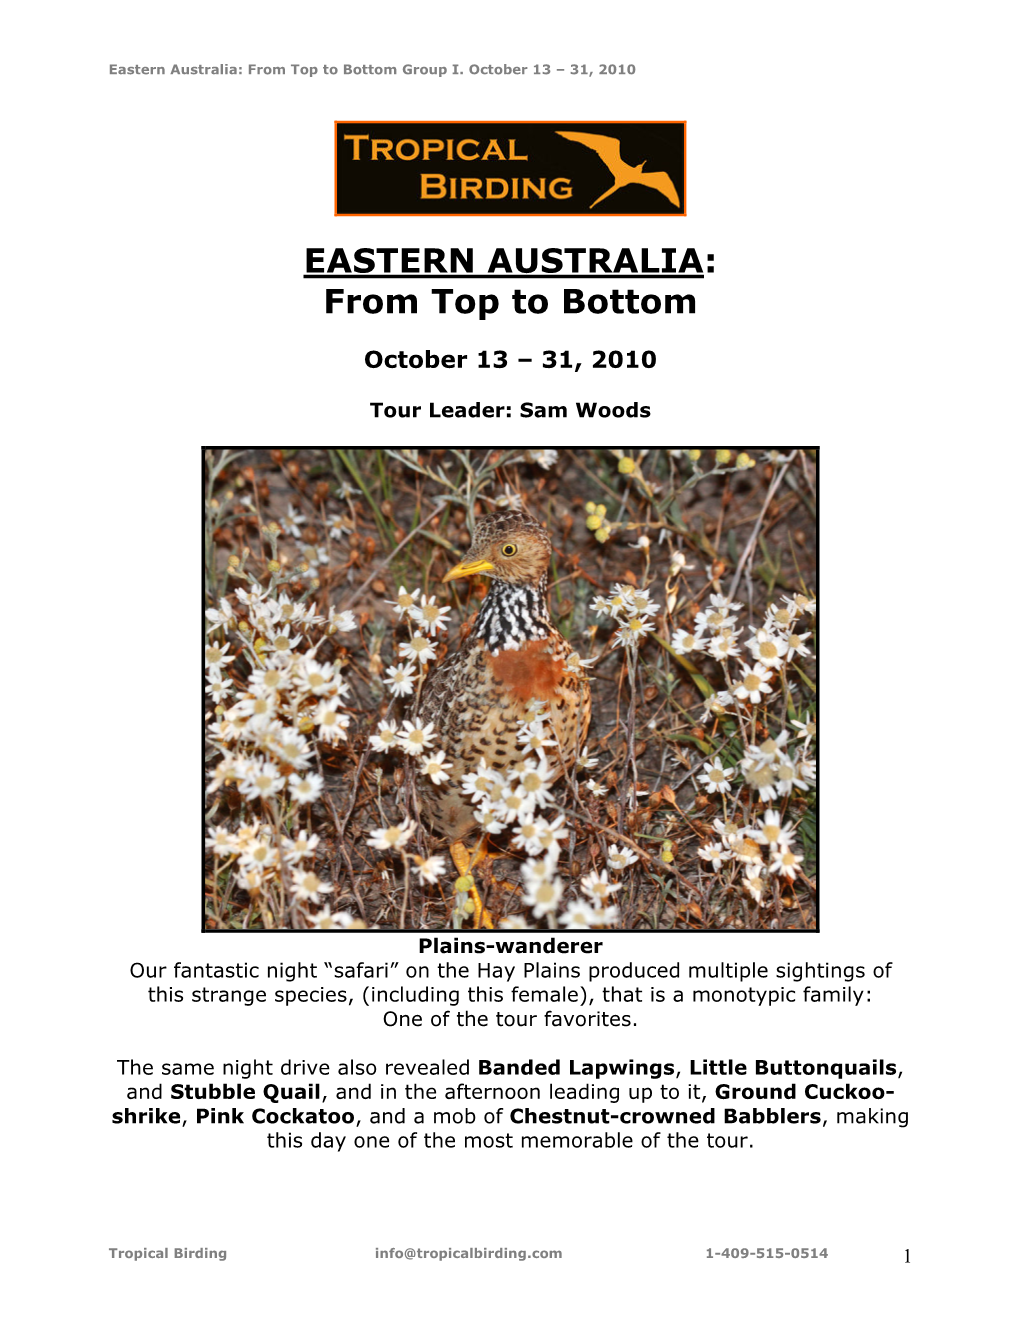 Eastern Australia: from Top to Bottom Group I